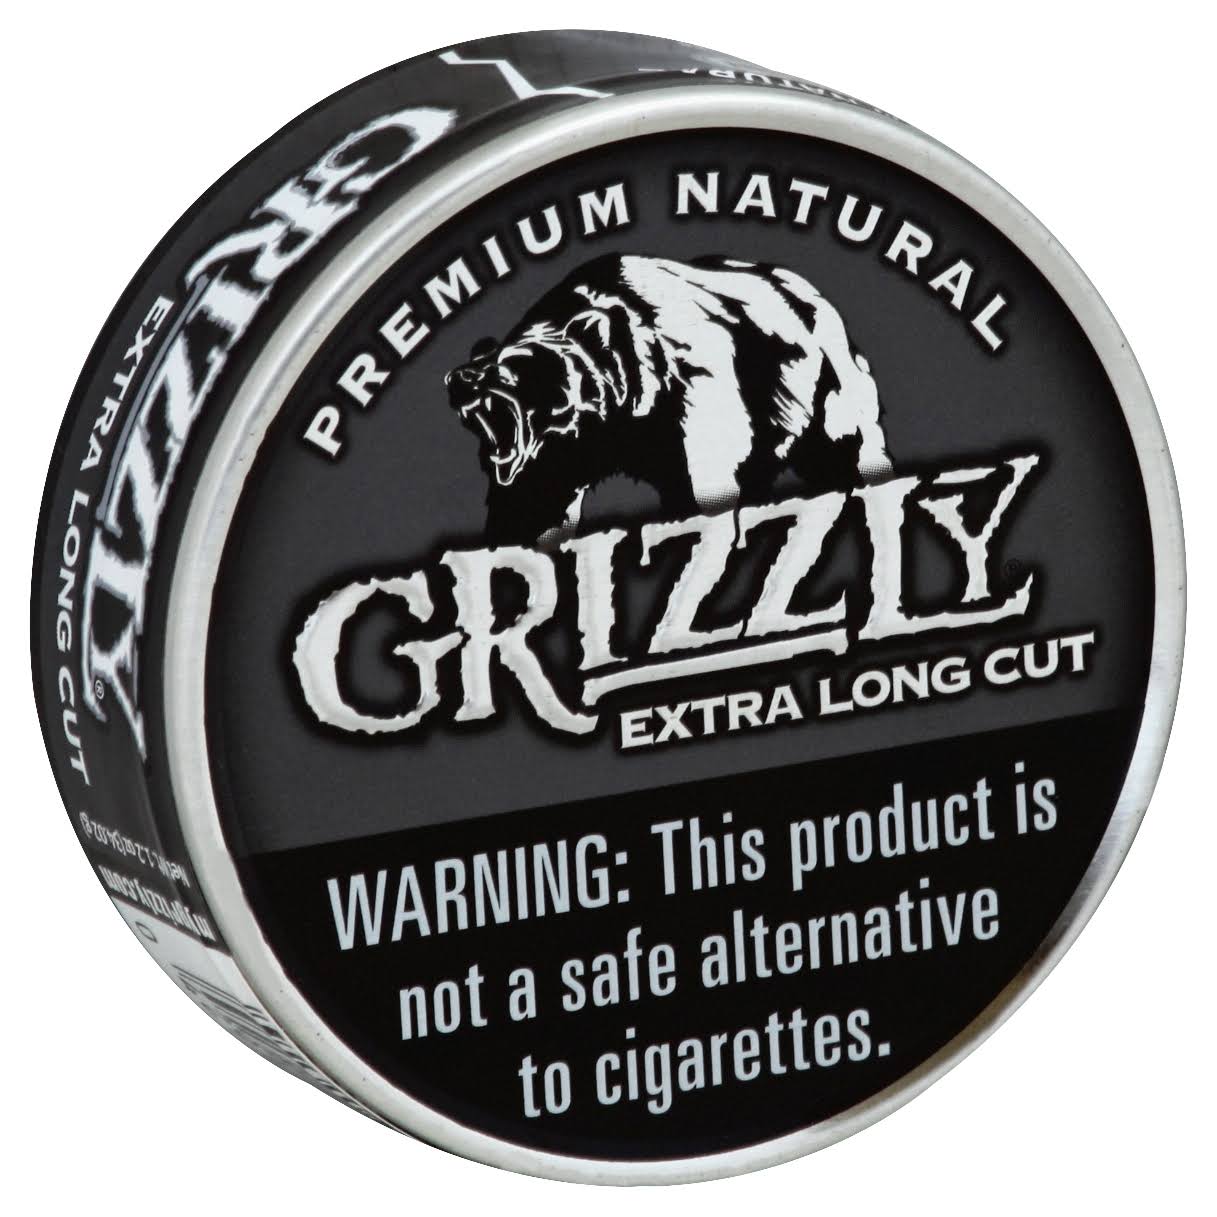 Grizzly Snuff, Moist, Premium Natural, Extra Long Cut - 1.2 oz